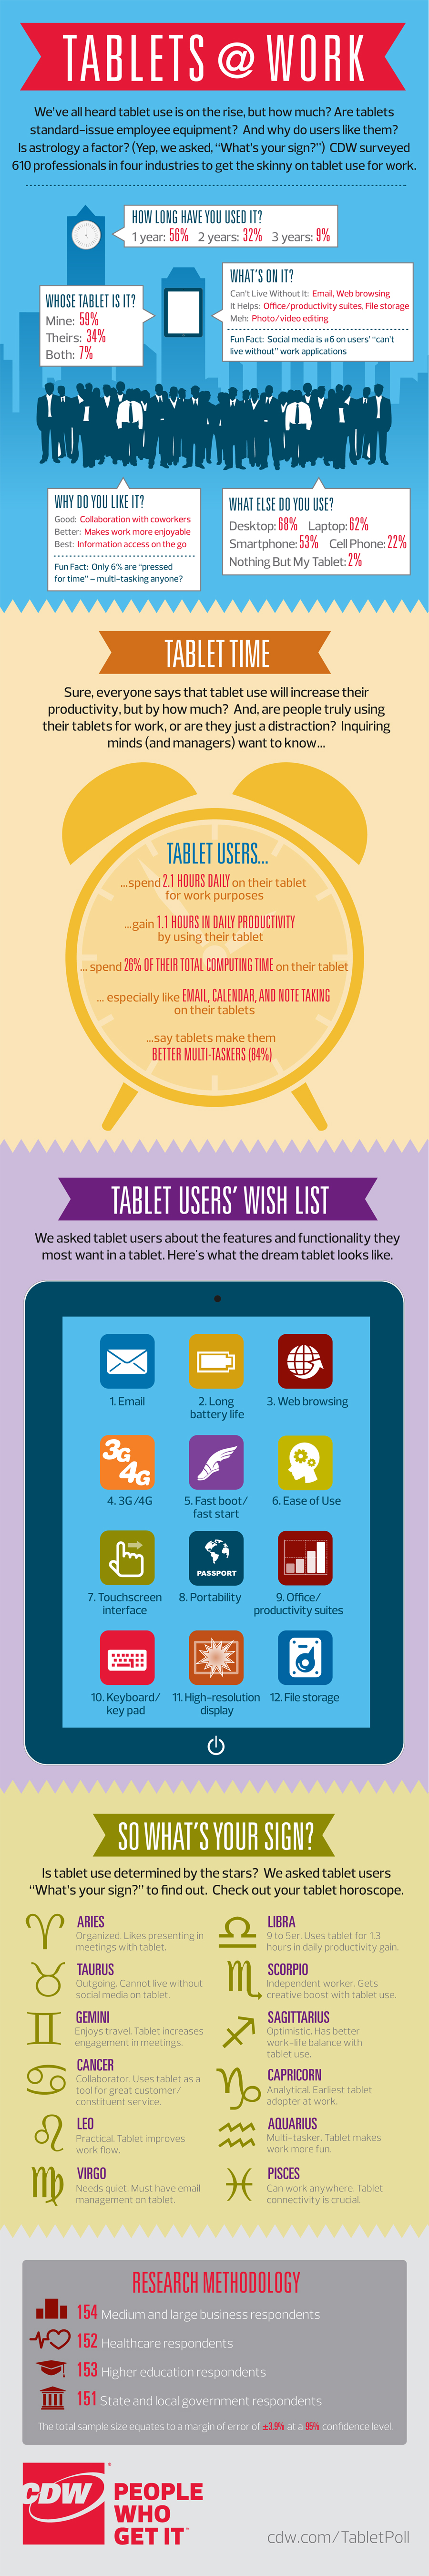 Tablets in the Workplace Infographic